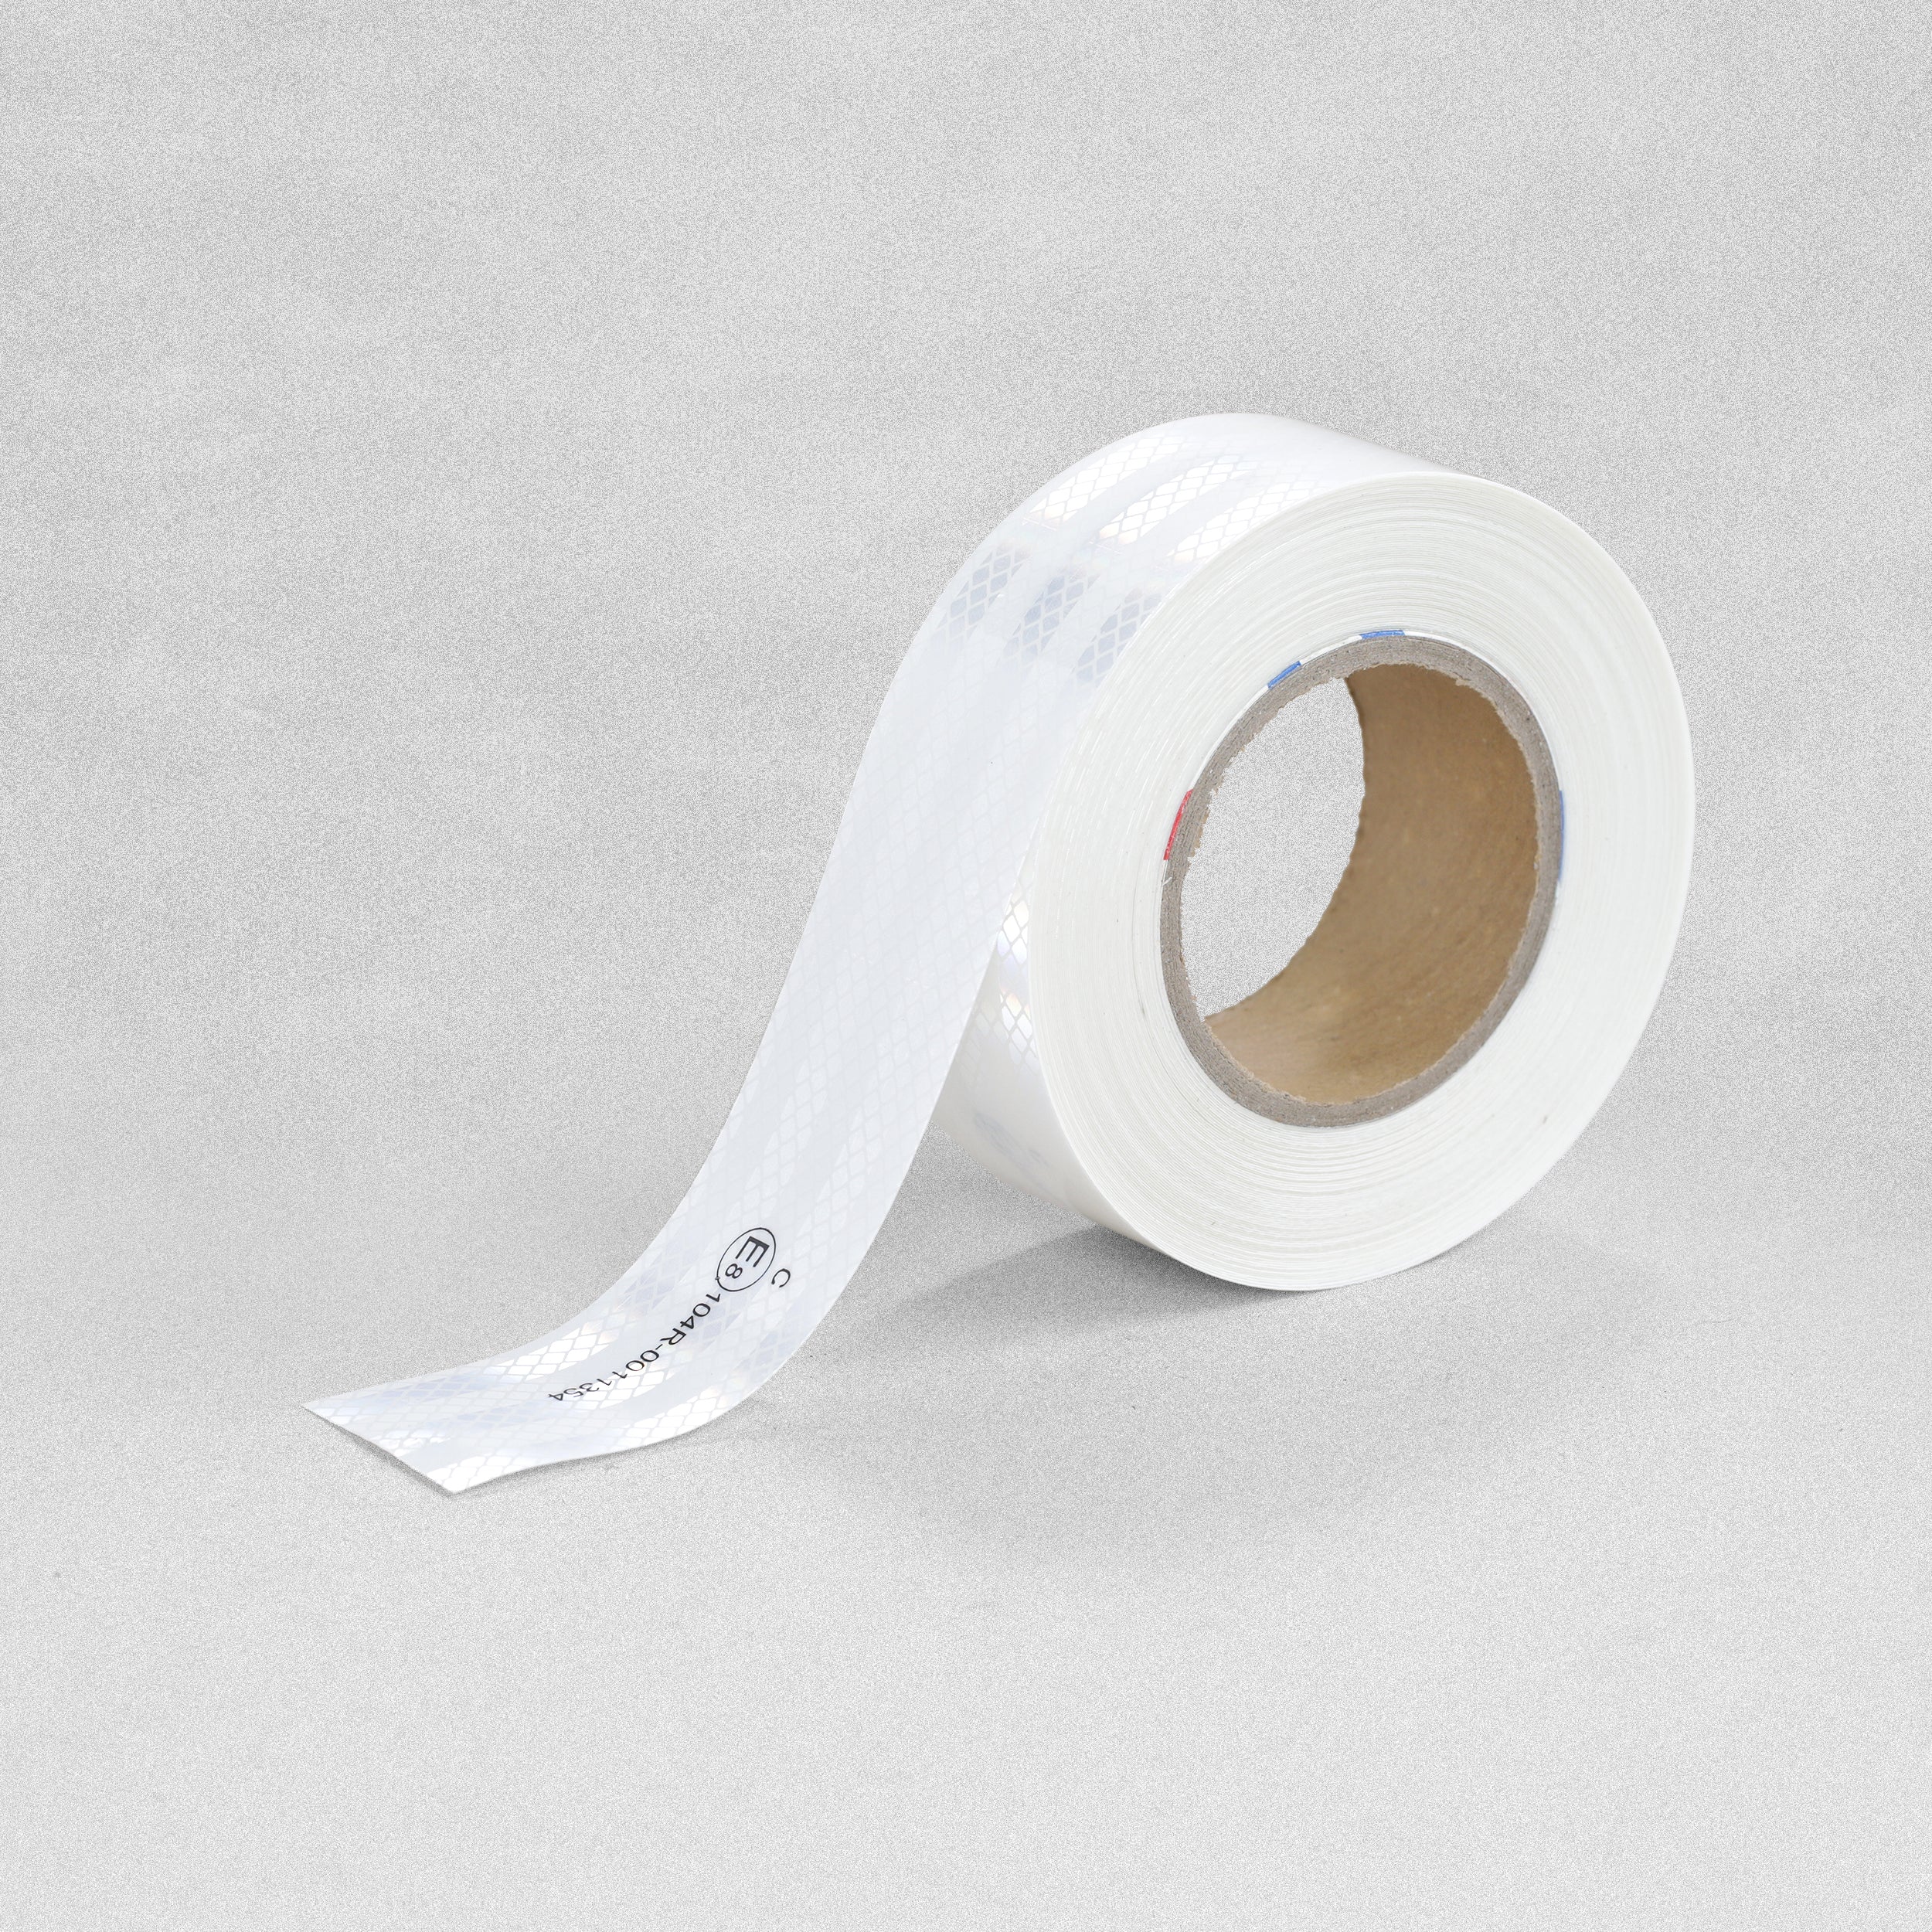 Blaze Vehicle Conspicuity Tape 50mm x 25m - White